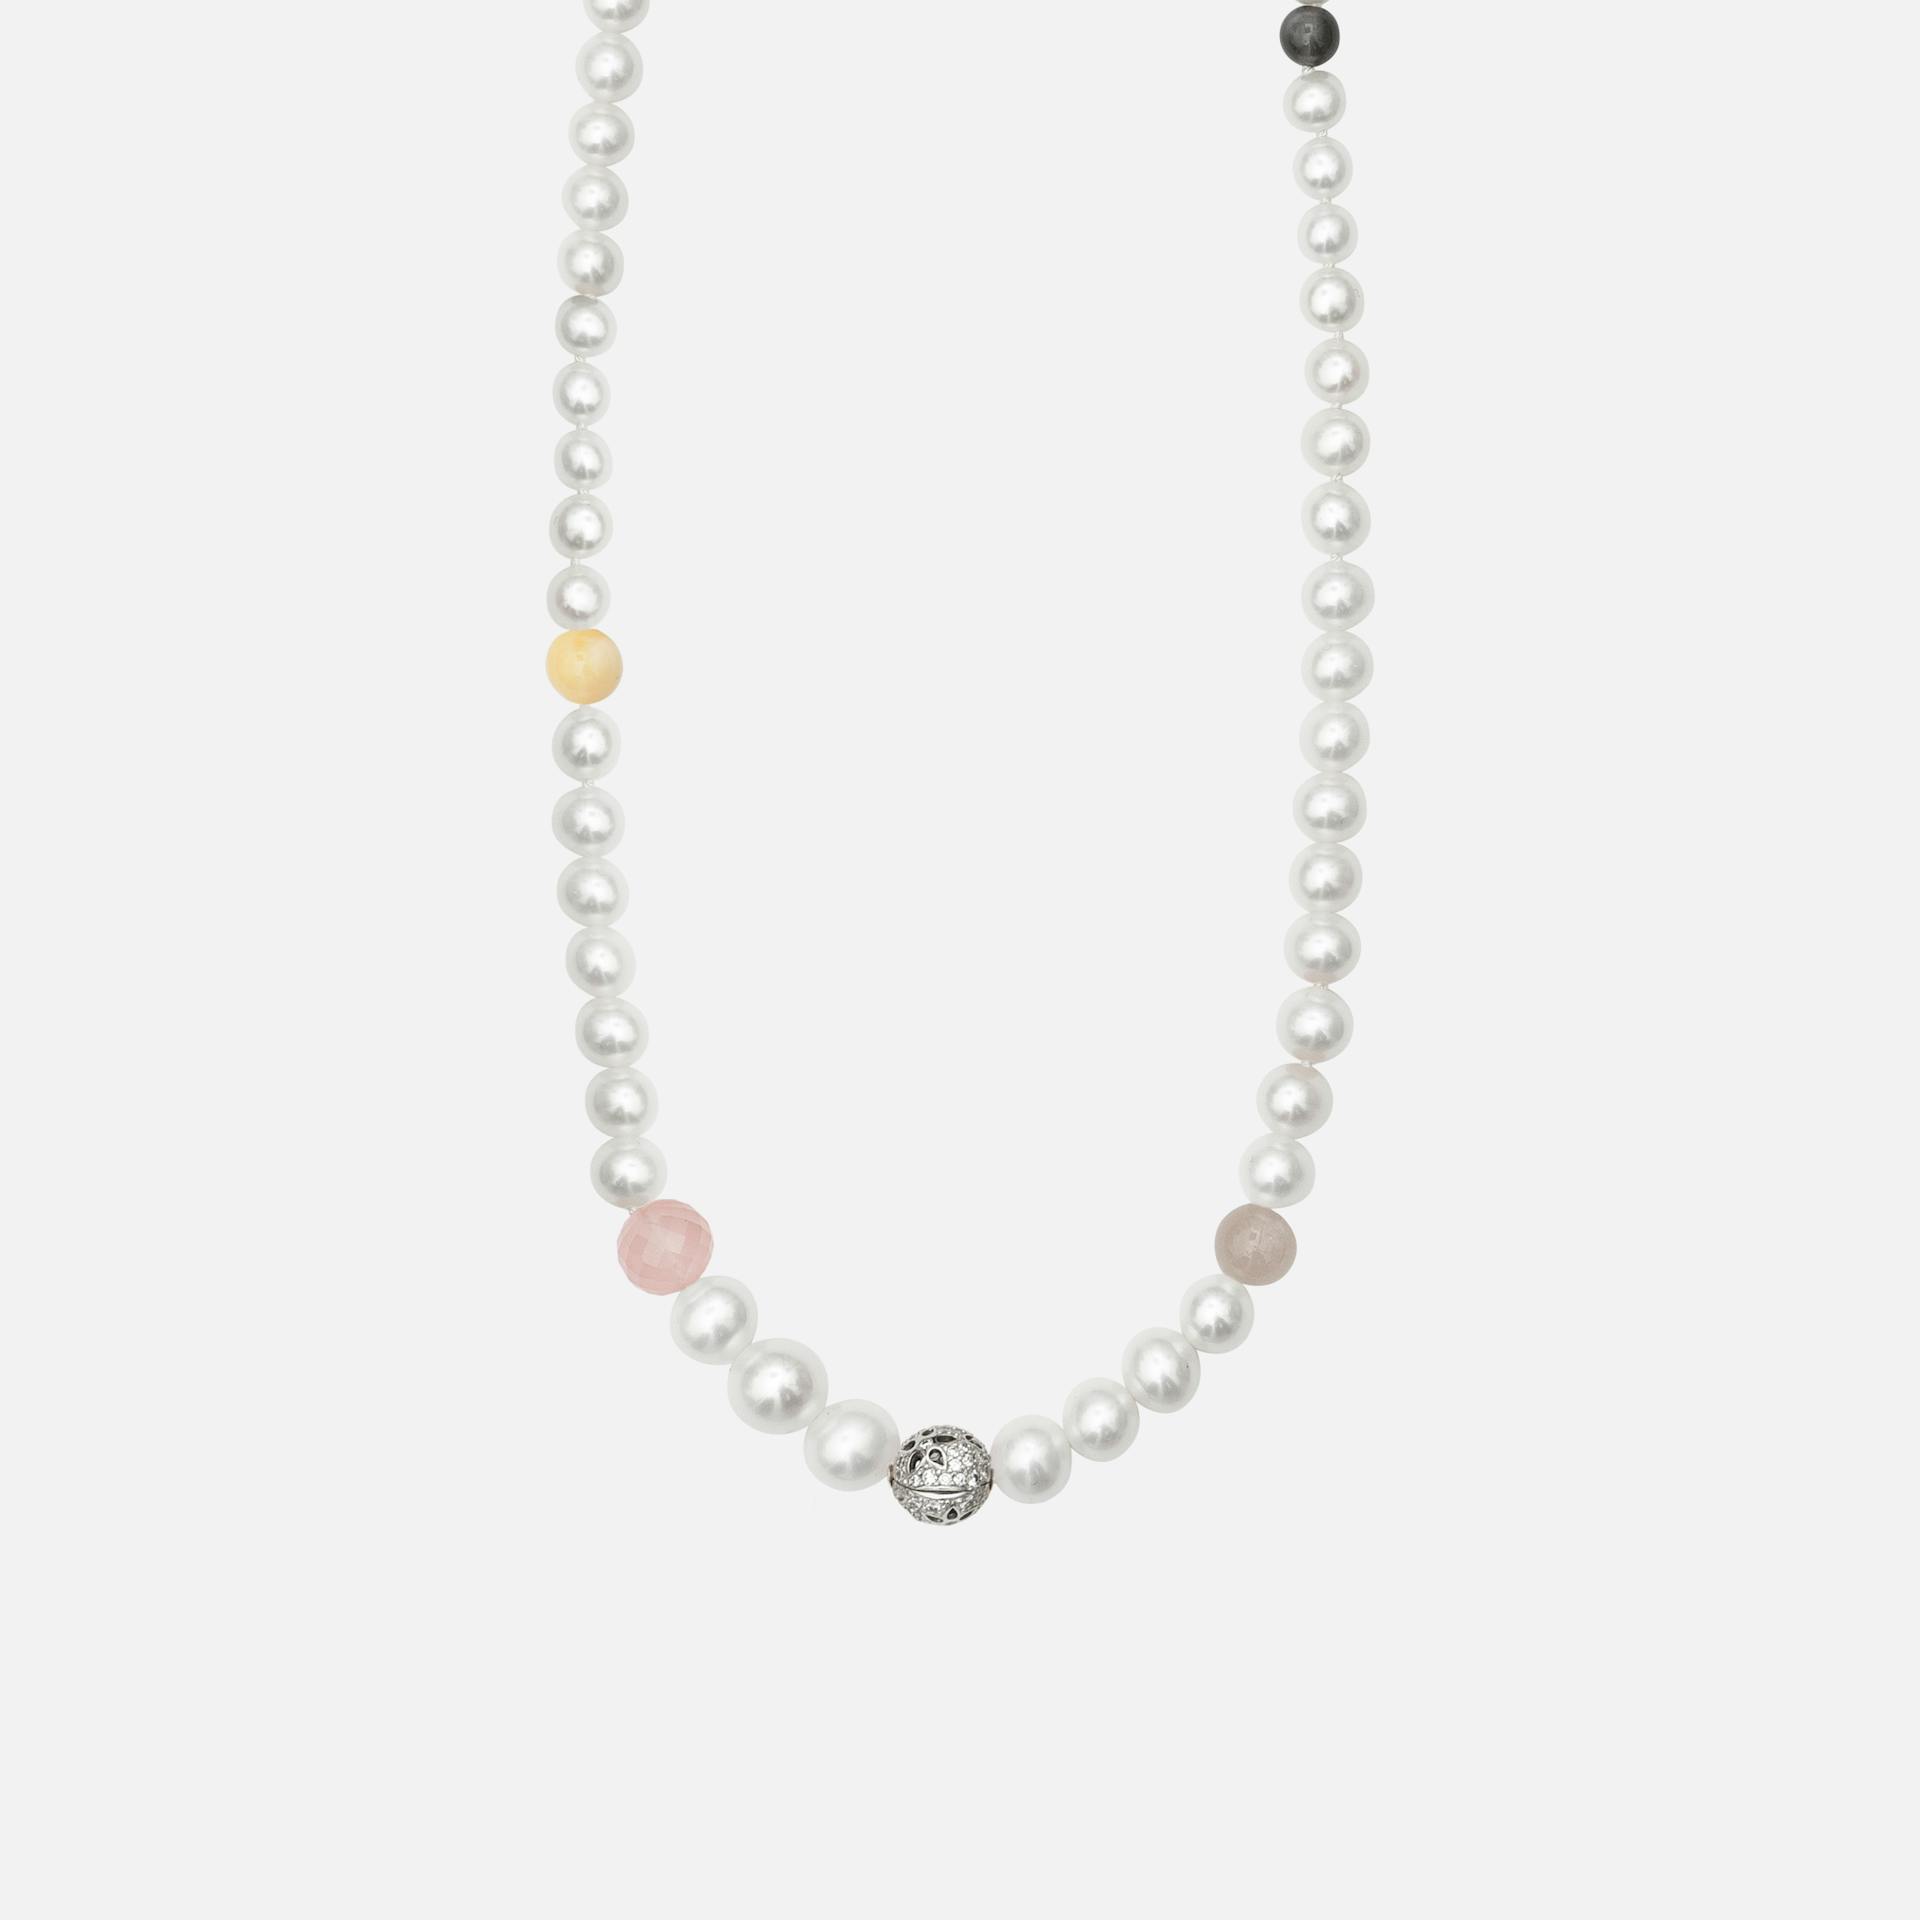 Bead collier without lock Freshwater pearls and mixed stones